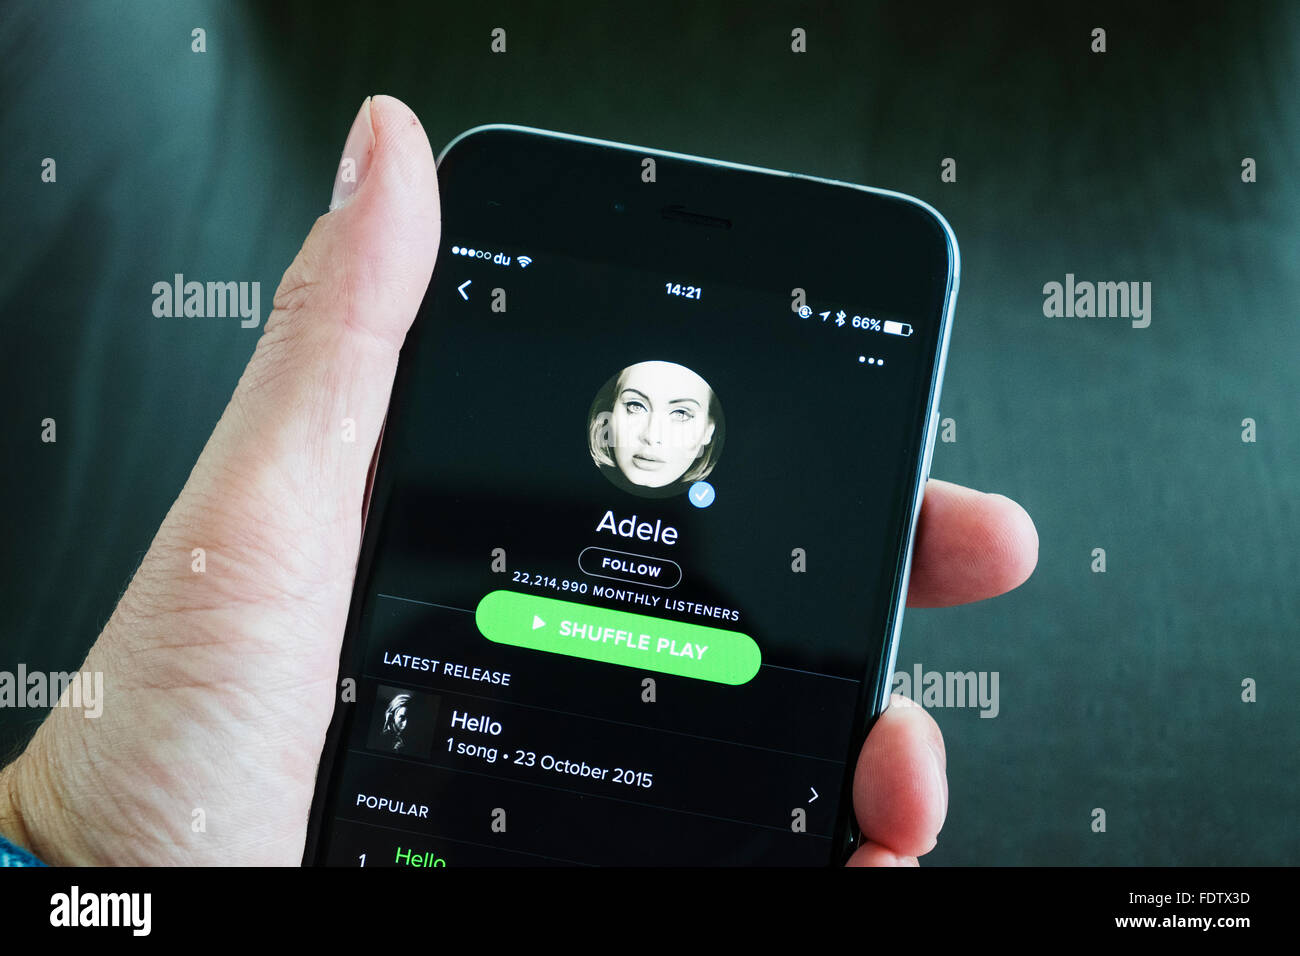 Spotify online music streaming app showing Adele on an iPhone 6 plus smart phone Stock Photo